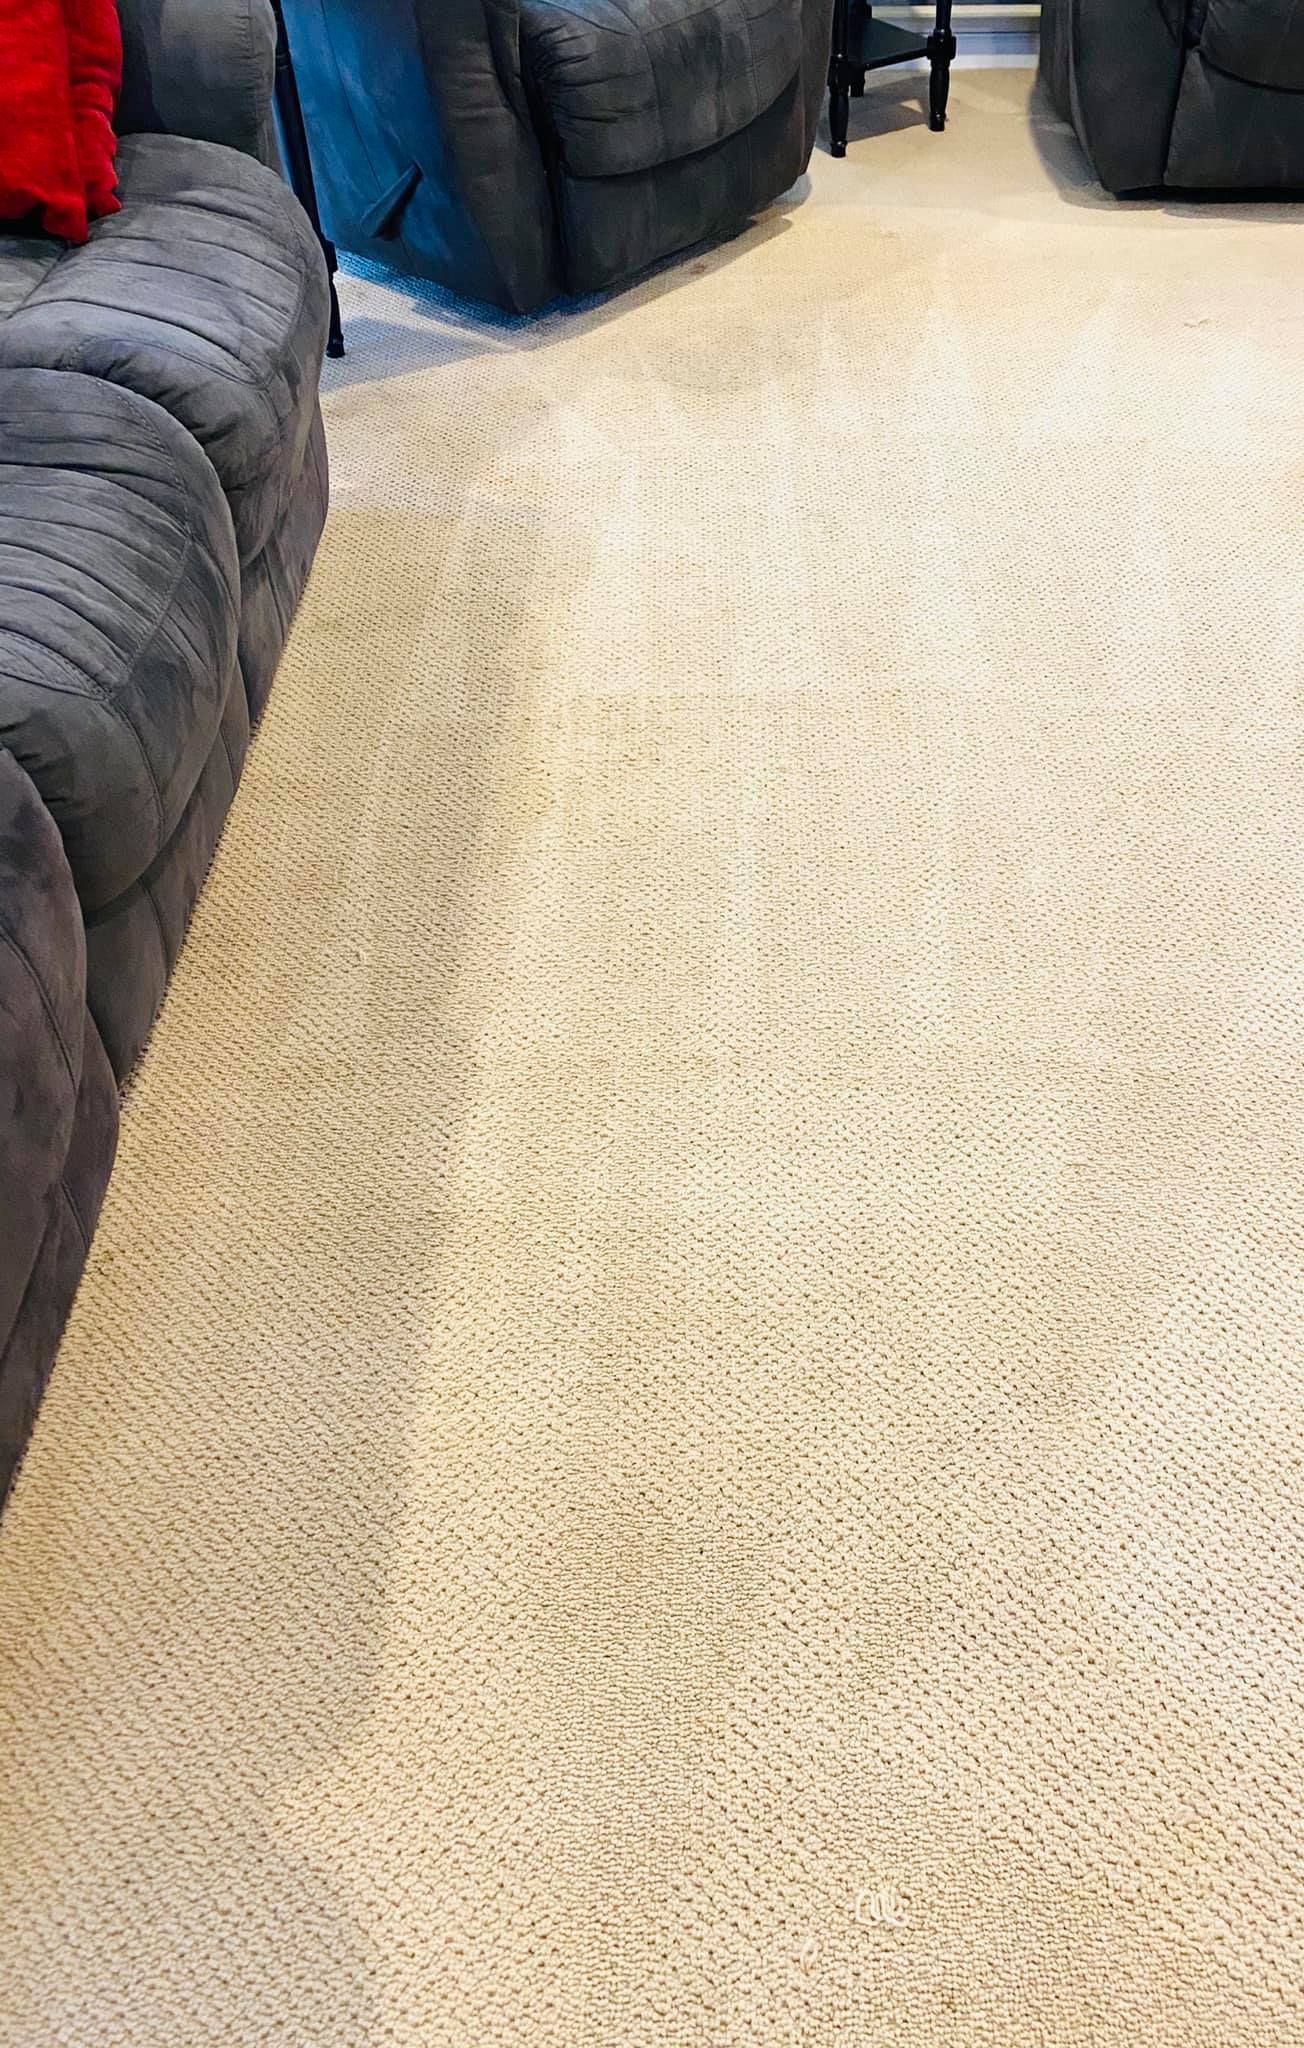 After Carpet Stain Removal